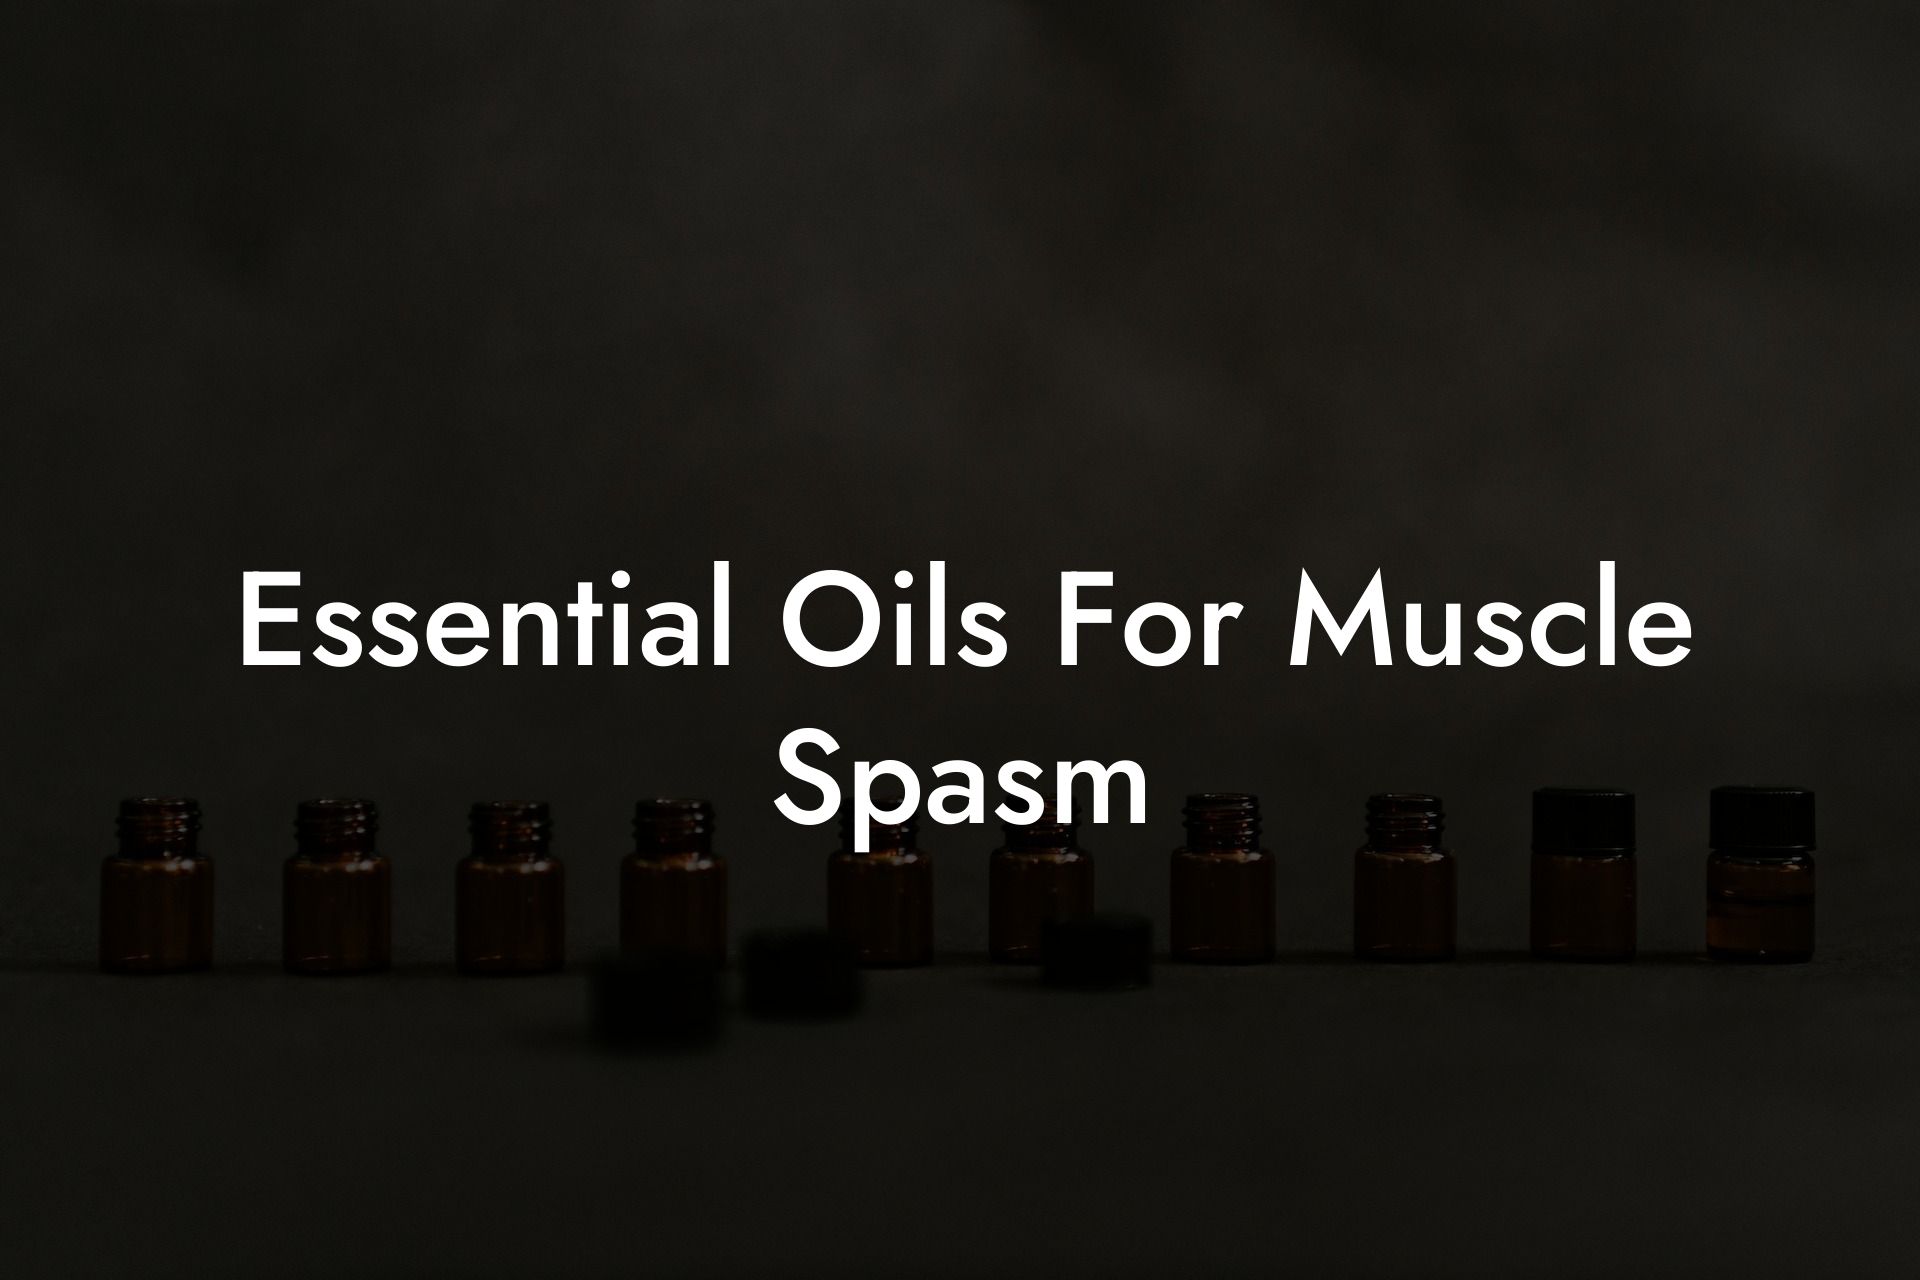 Essential Oils For Muscle Spasm